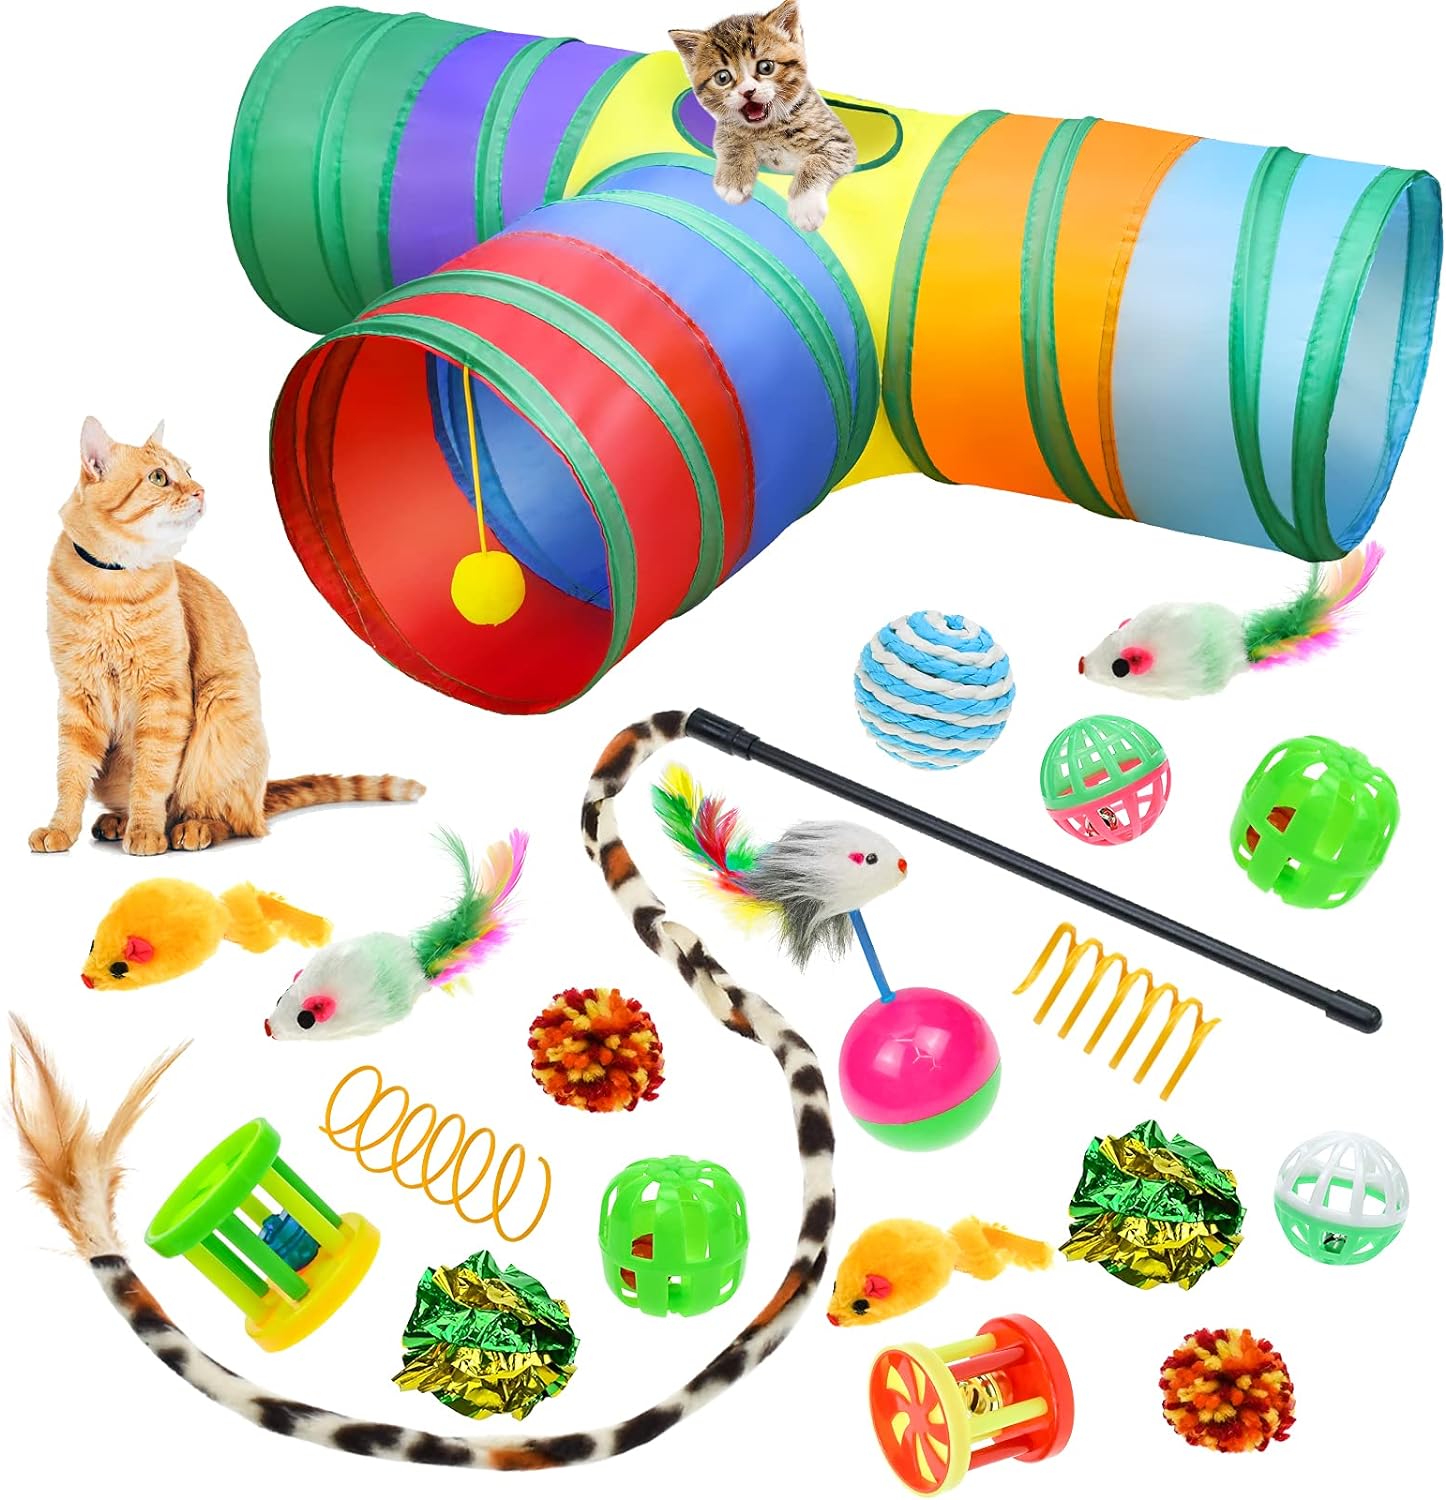 Malier Cat Toys Kitten Toys Set, Collapsible Cat Tunnels for Indoor Cats, Interactive Kitty Toys Cat Feather Toy Fluffy Mouse Crinkle Balls Cat 3 Way Tube Tunnel Toys for Cat Puppy Kitty Kitten